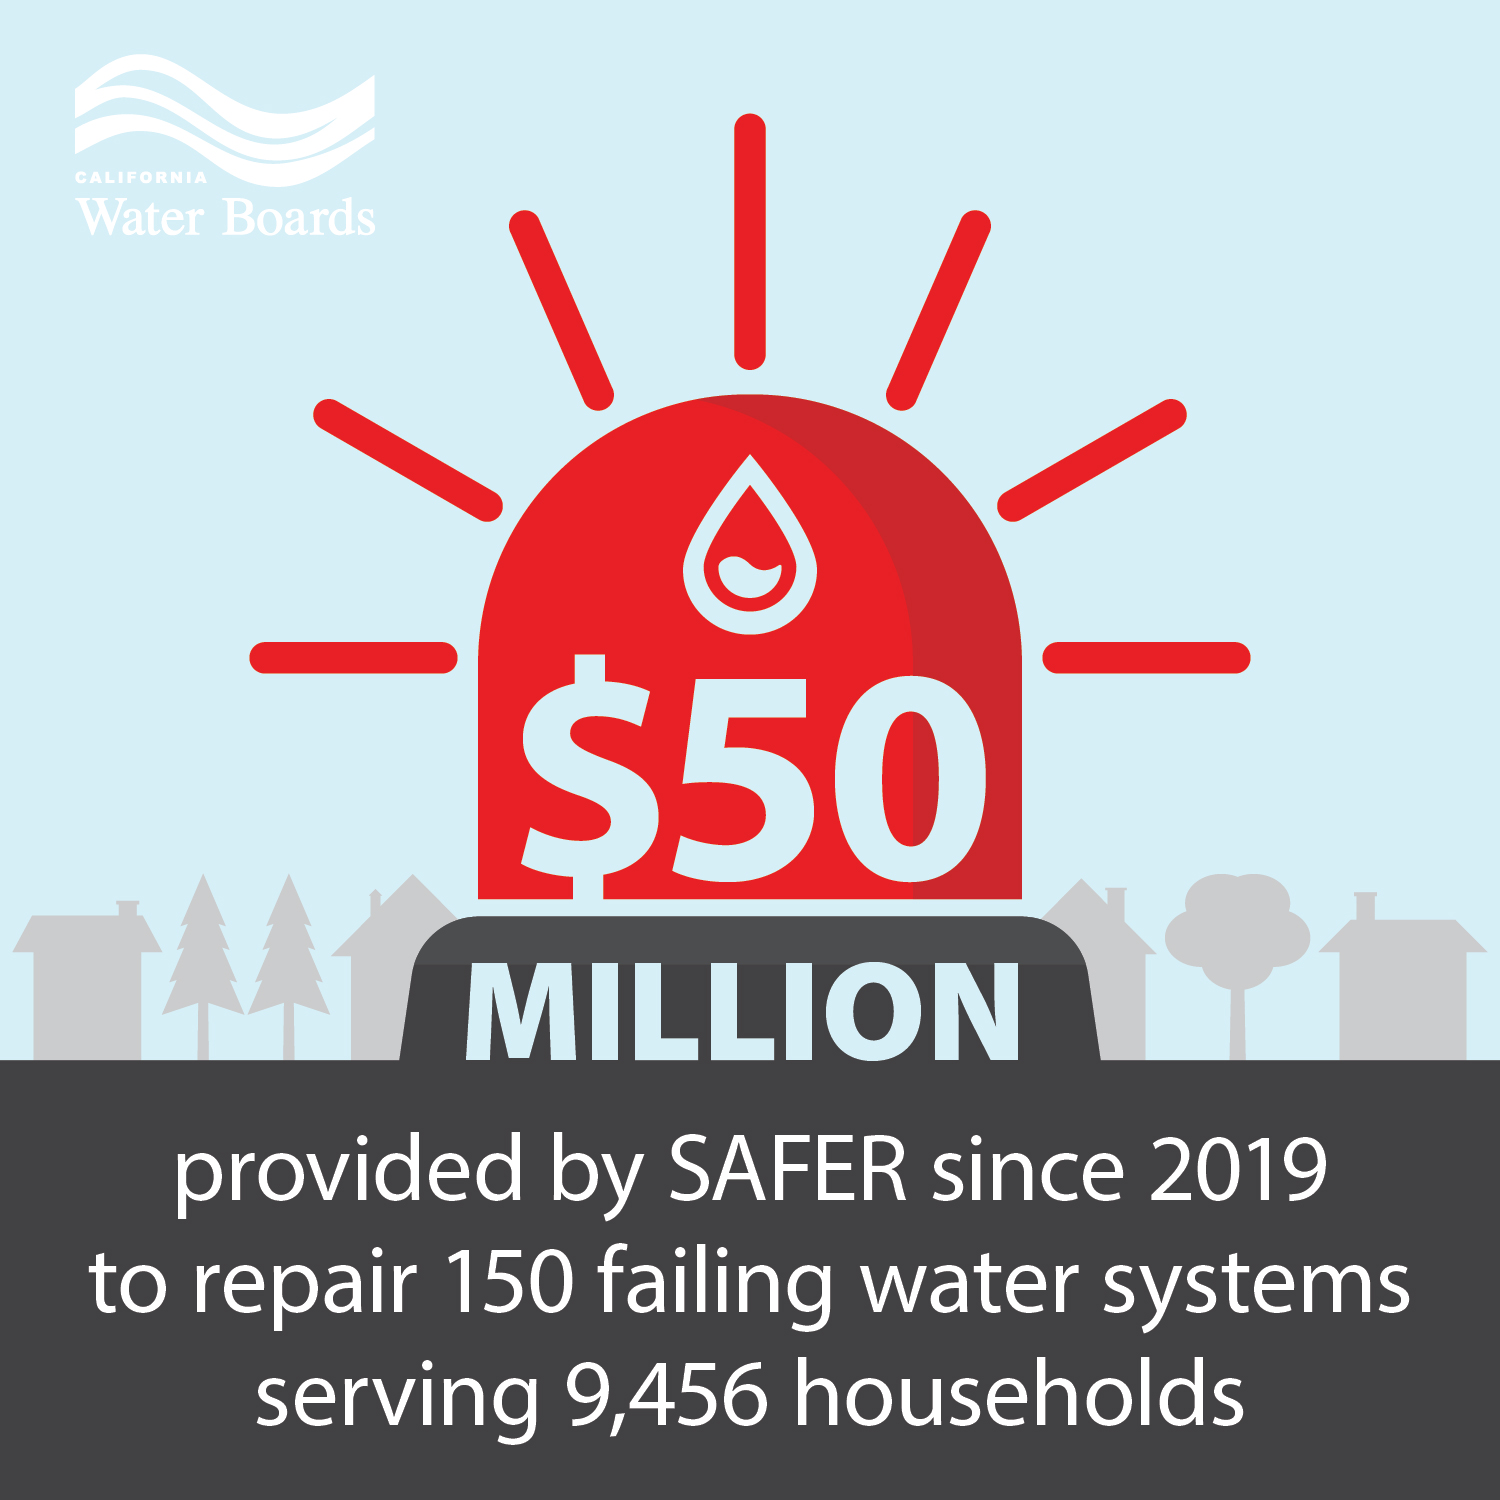 50 Million provided by SAFER since 2019 to repair 150 failing water systems serving 9,456 households